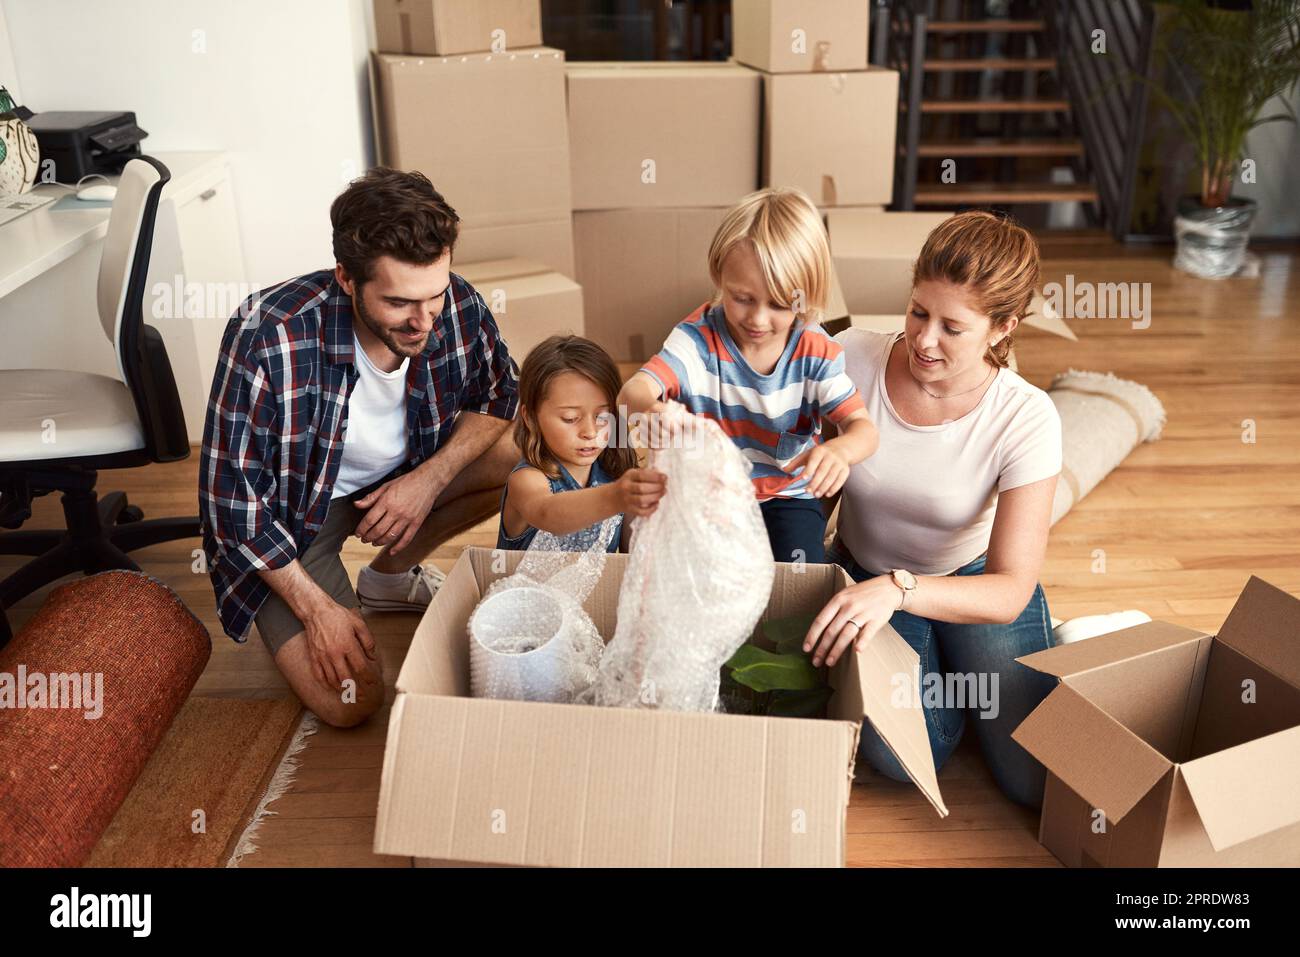 Home is where you make it. a young family on their moving day. Stock Photo